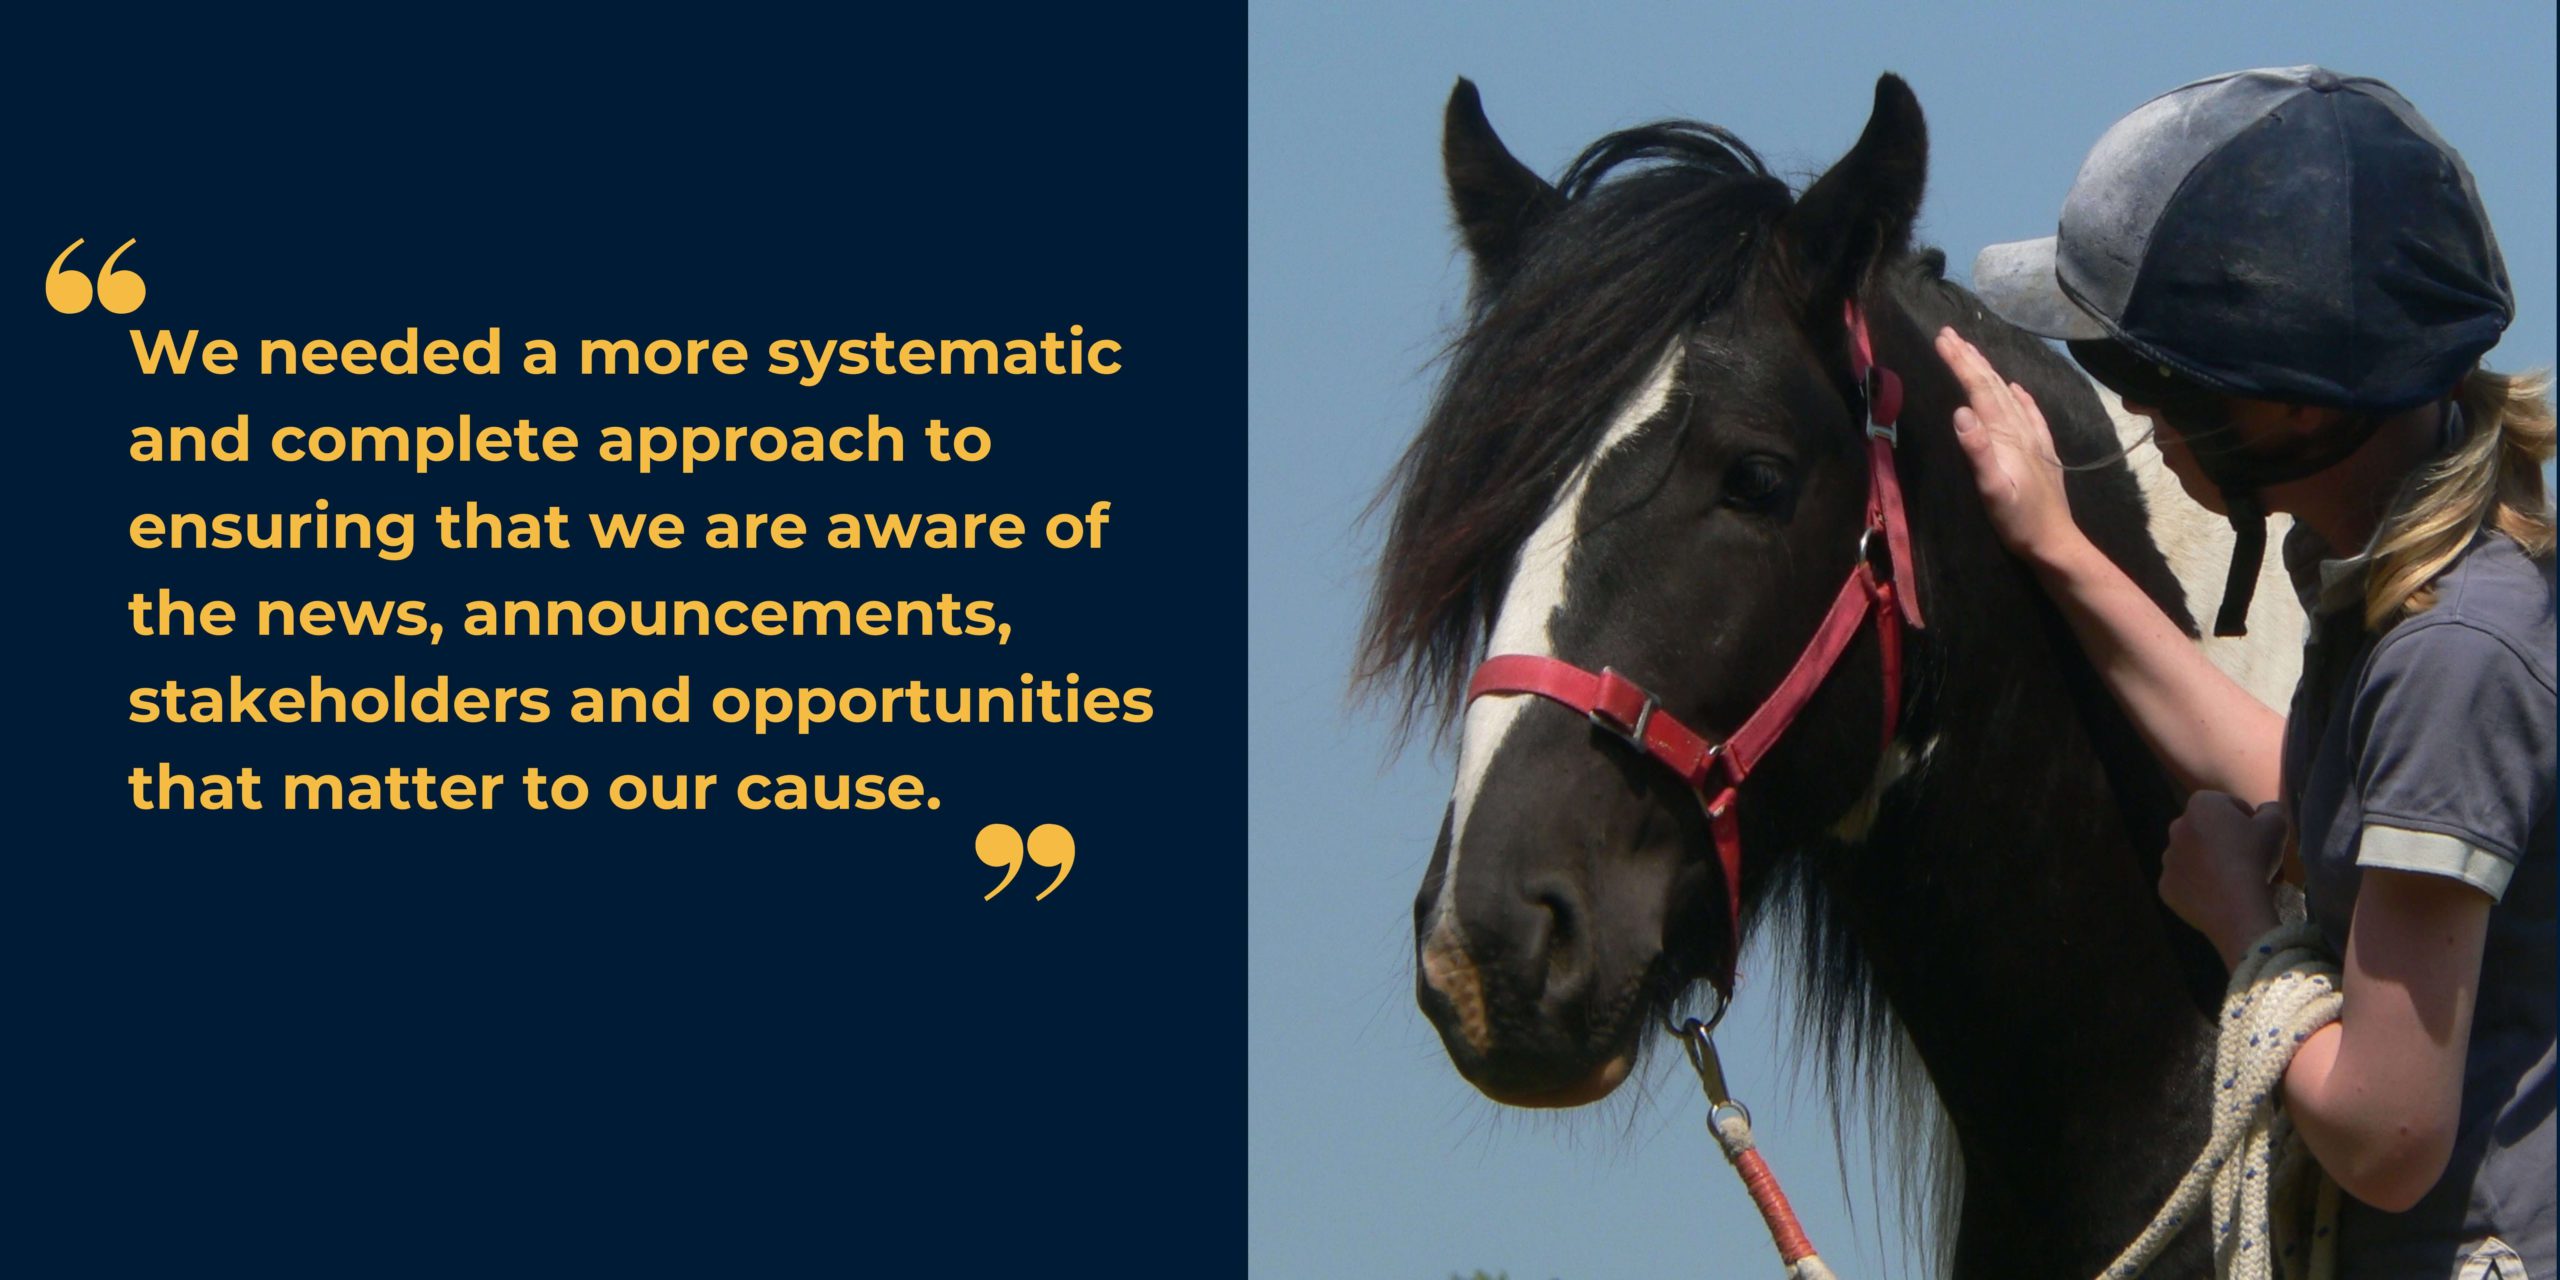 Image of a black horse being stroked by a woman in a horse riding helmet alongside the text "We needed a more systematic and complete approach to ensuring that we are aware of the news, announcements, stakeholders and opportunities that matter to our cause."